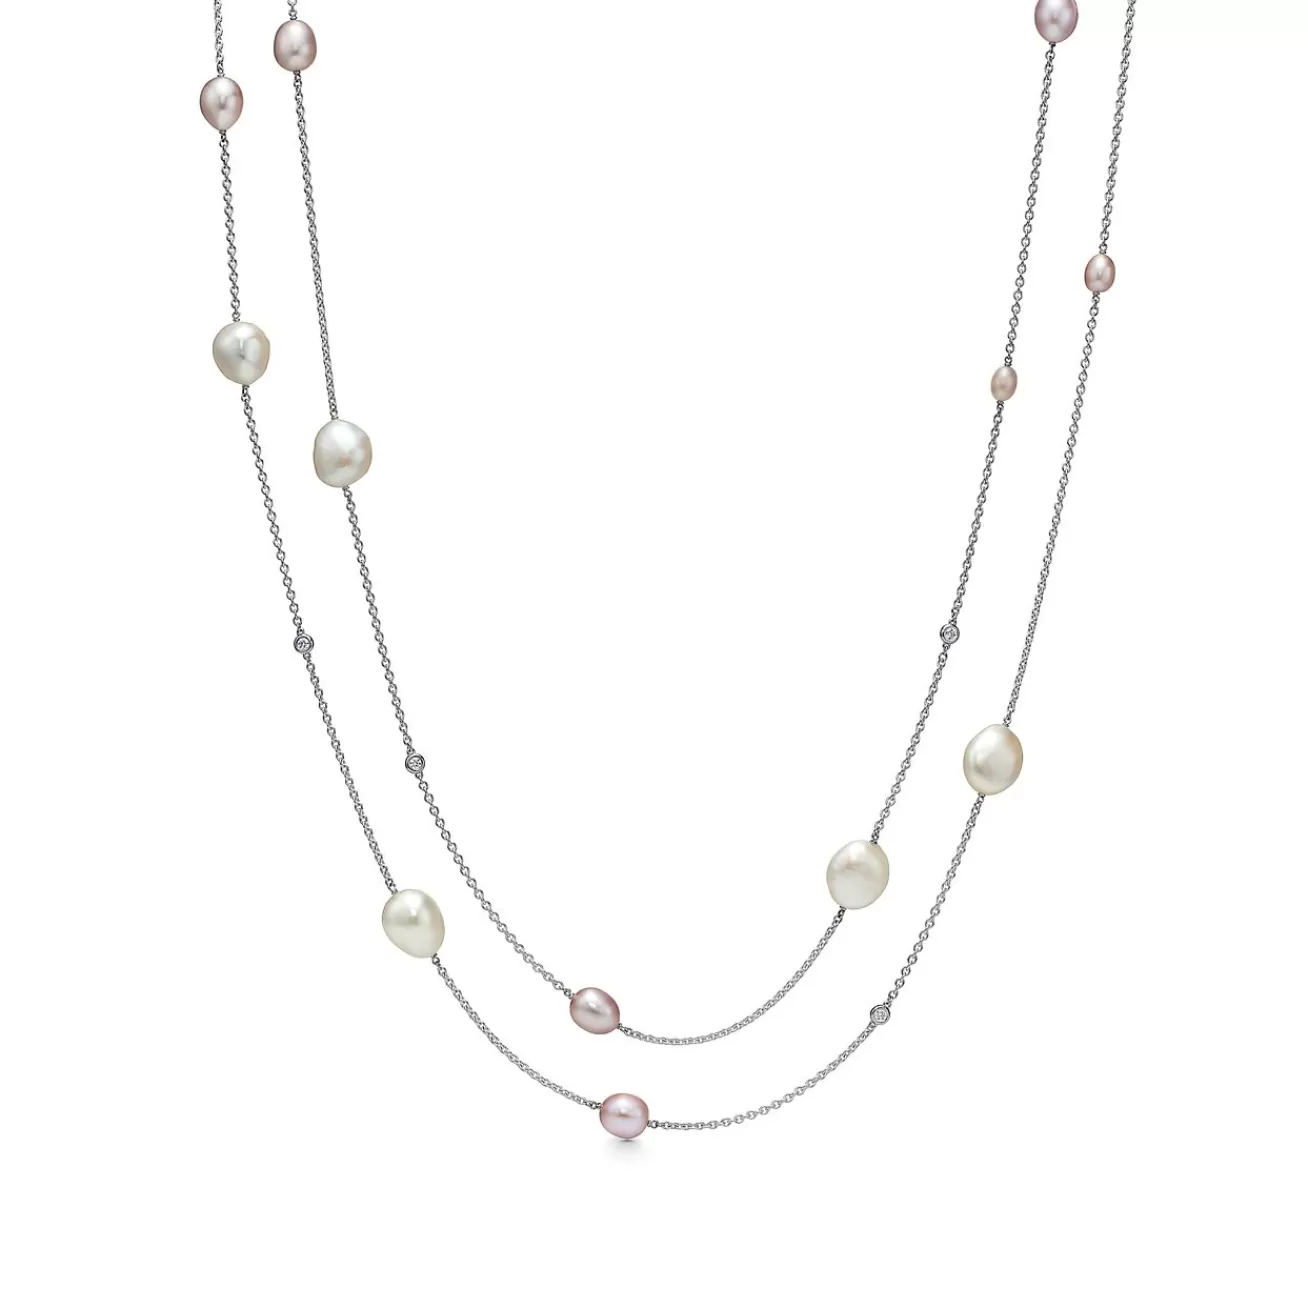 Tiffany & Co. Elsa Peretti® Pearls by the Yard™ sprinkle necklace in sterling silver. | ^ Necklaces & Pendants | Sterling Silver Jewelry